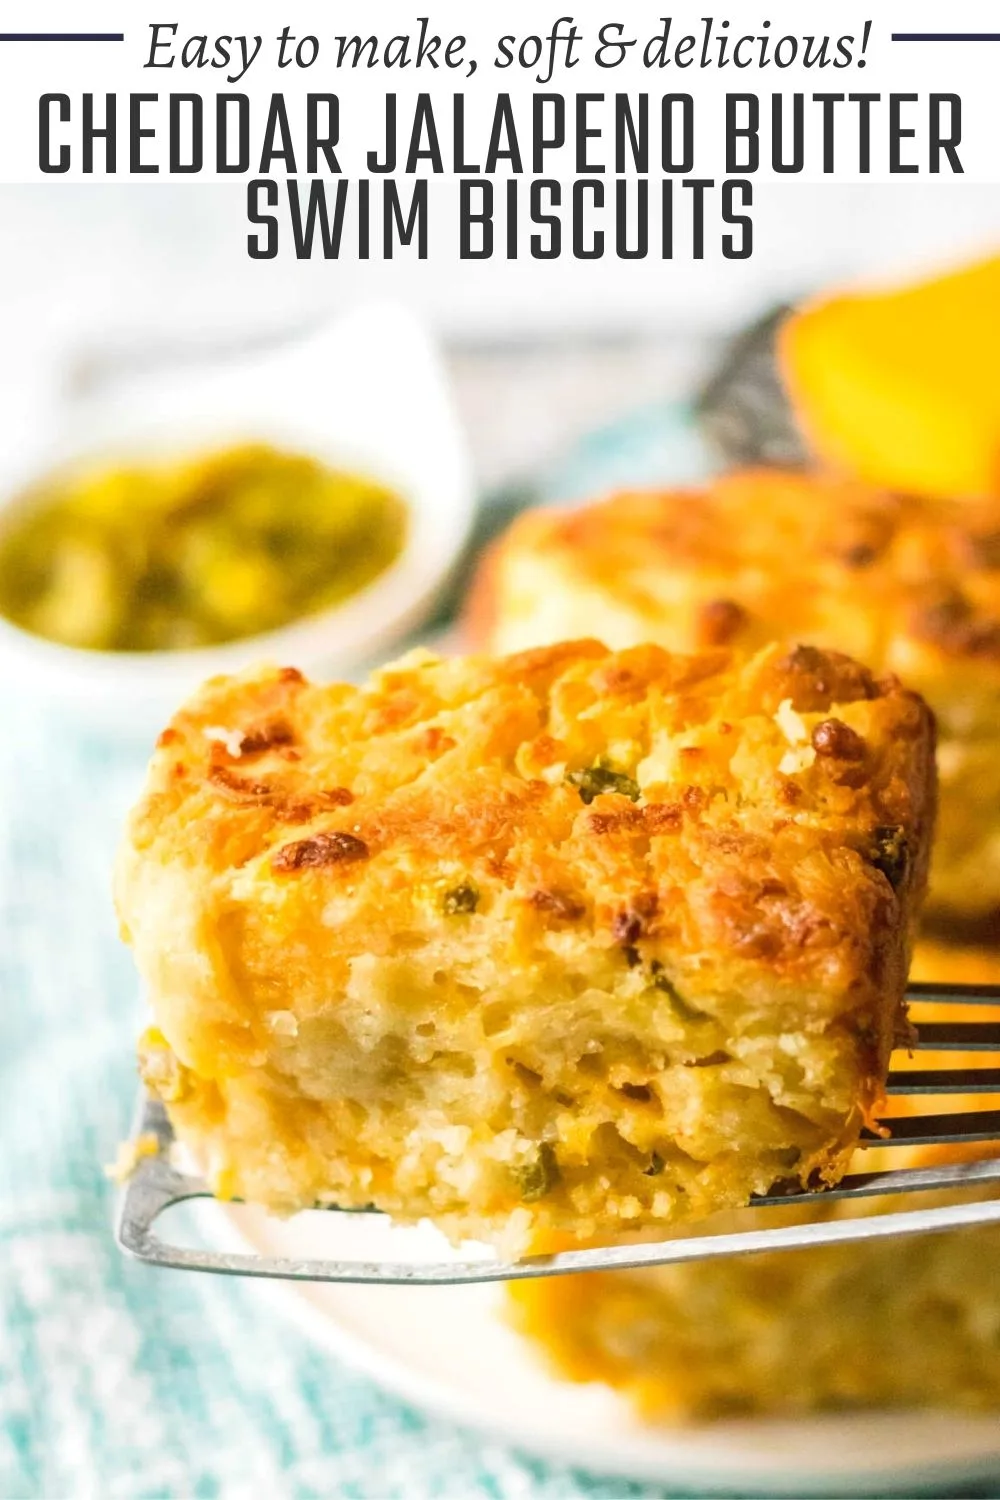 If you love soft buttery biscuits, you are going to love this cheddar Jalapeno butter swim biscuits recipe. They are easy to make and loaded with cheese and a hint of spice, making them perfect to go with your morning eggs or a bowl of soup. 